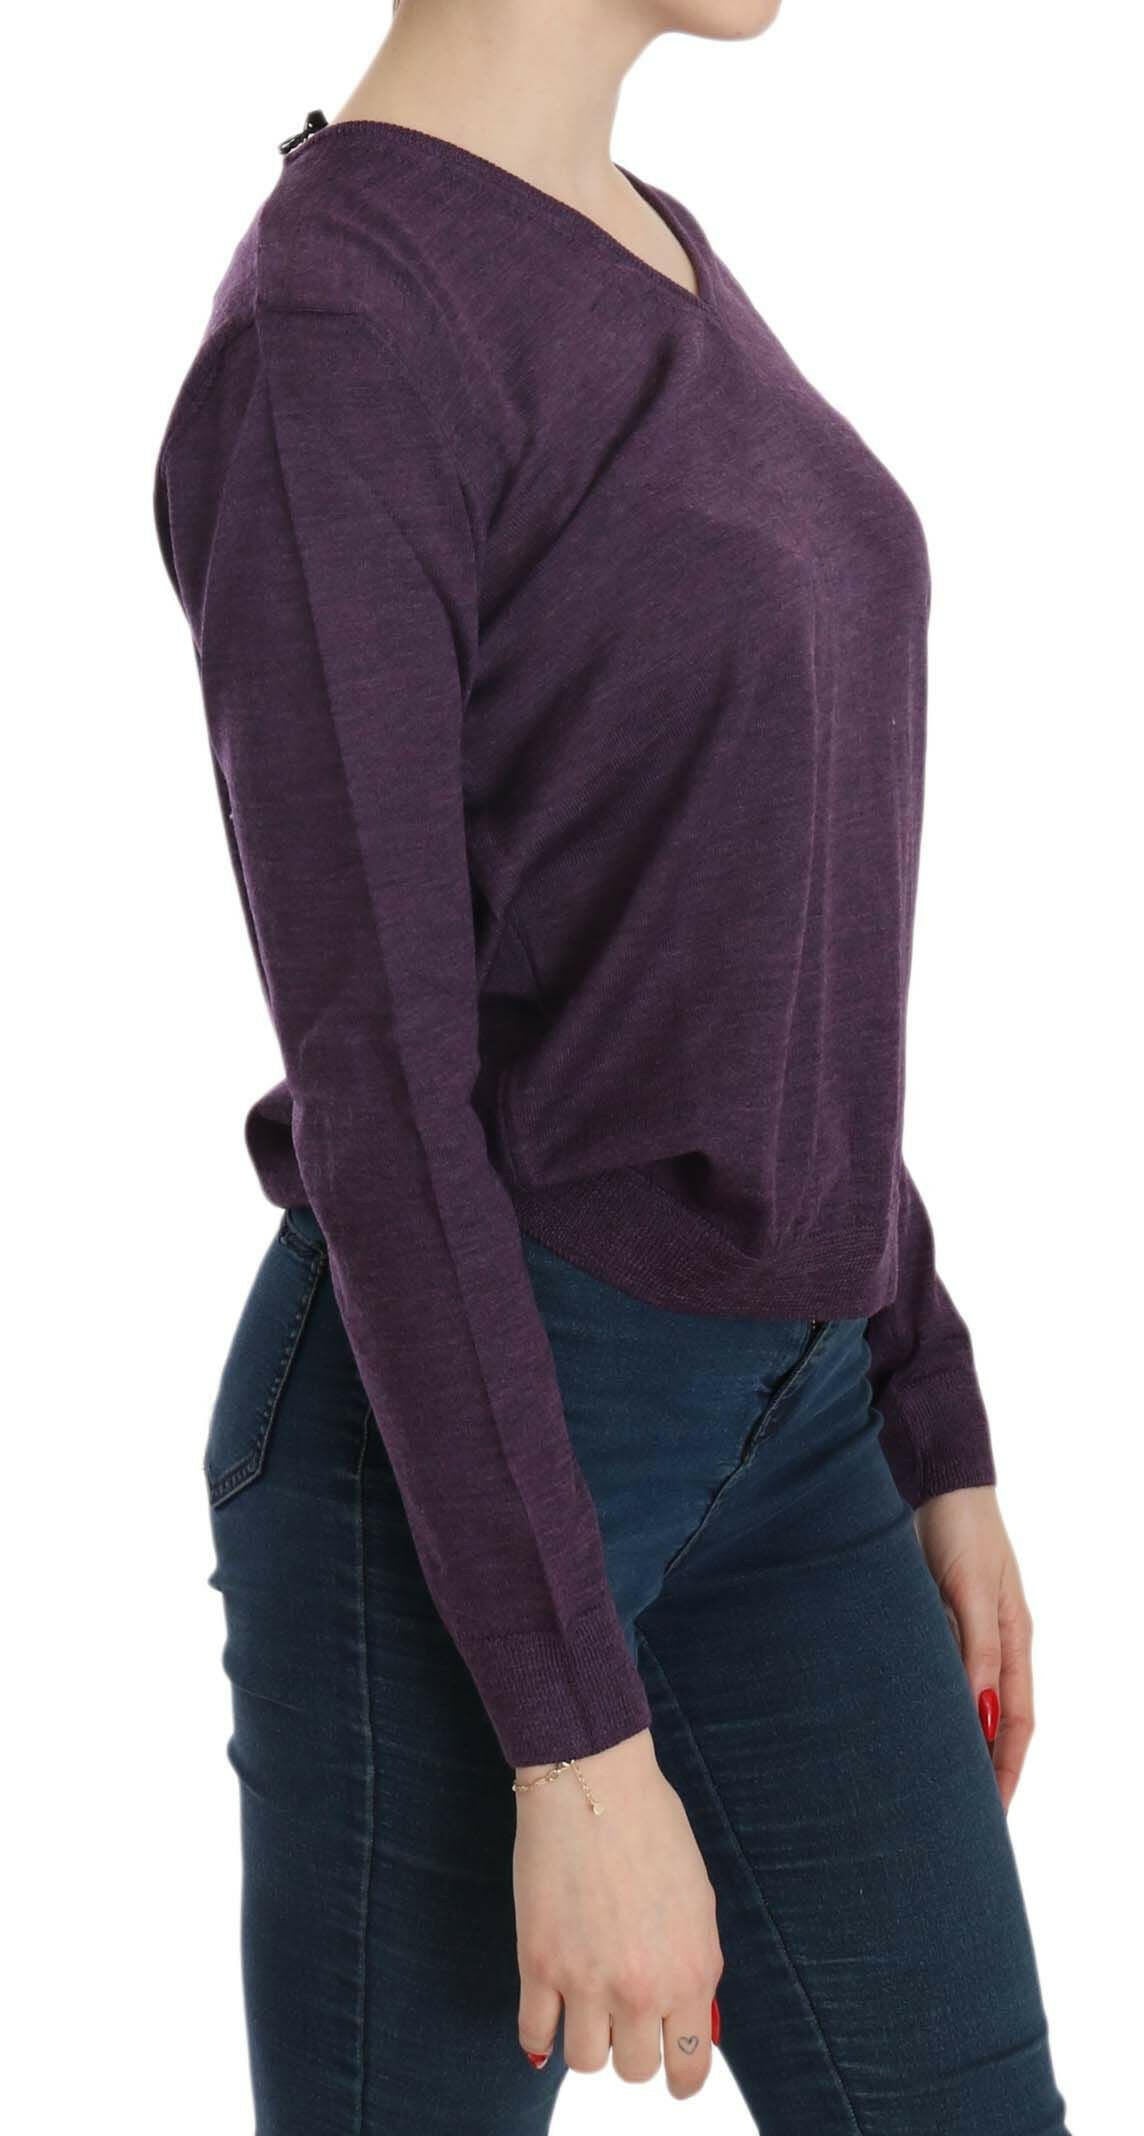 BYBLOS Purple V-neck Long Sleeve Pullover Top - GENUINE AUTHENTIC BRAND LLC  